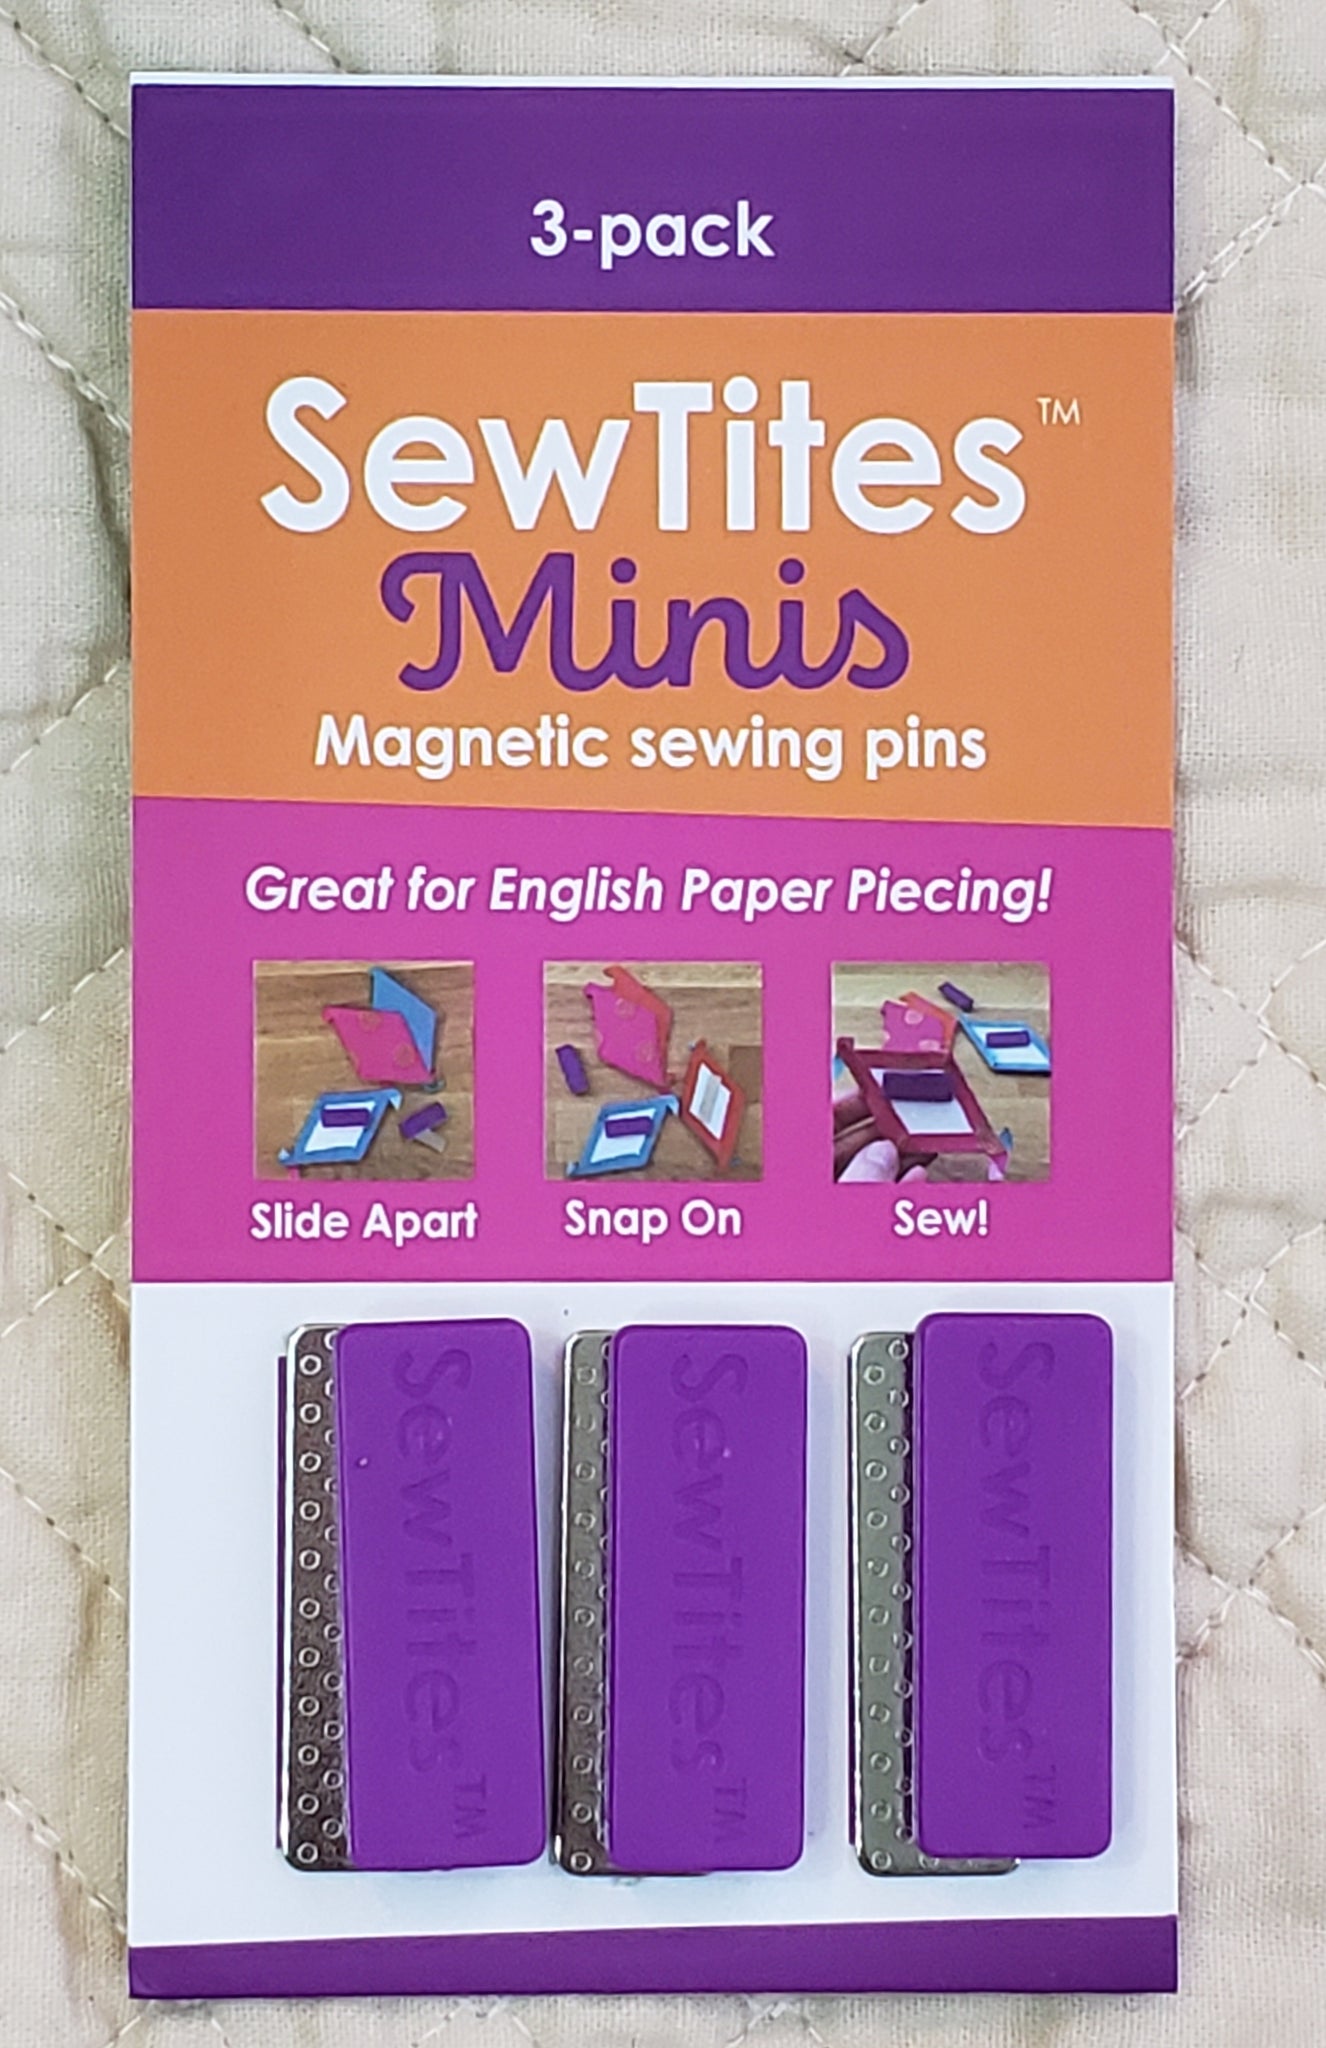 SewTites Magnetic Pins - 3 pack - MINIS